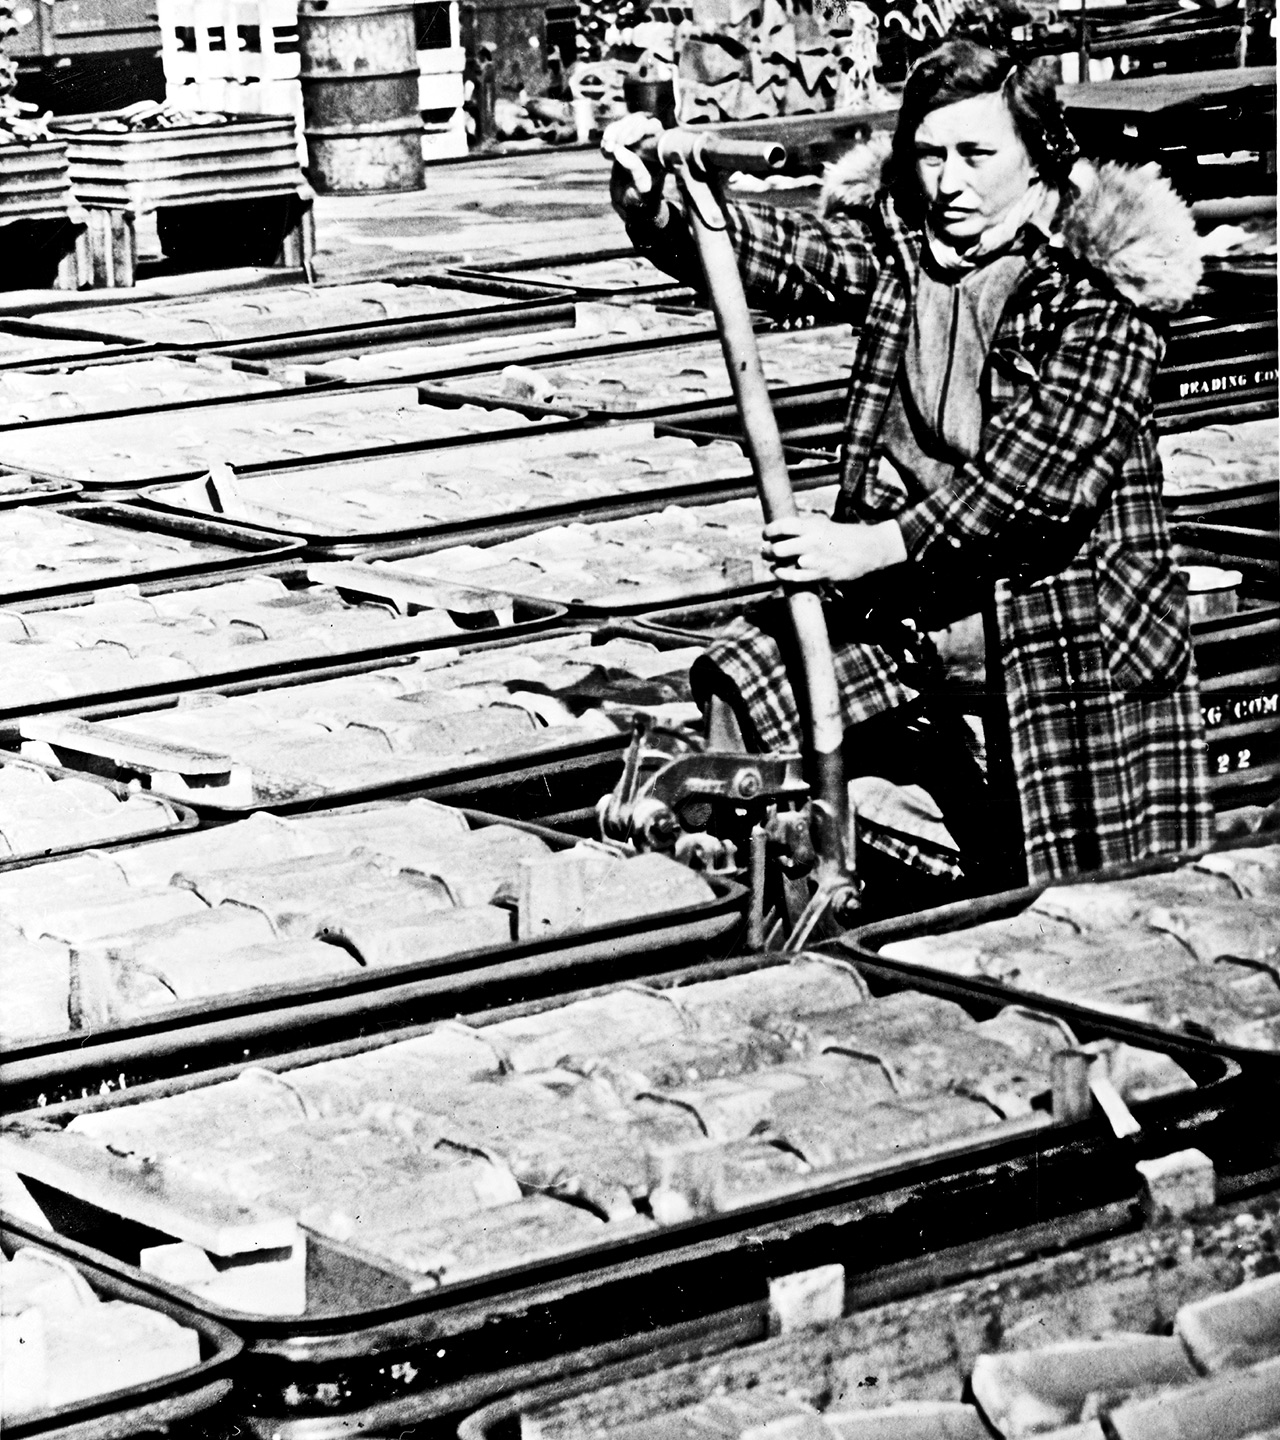 Mrs. Maude T. Henry, of Mohrsville, operating a lift jack preparatory to moving a load of car journal bearings